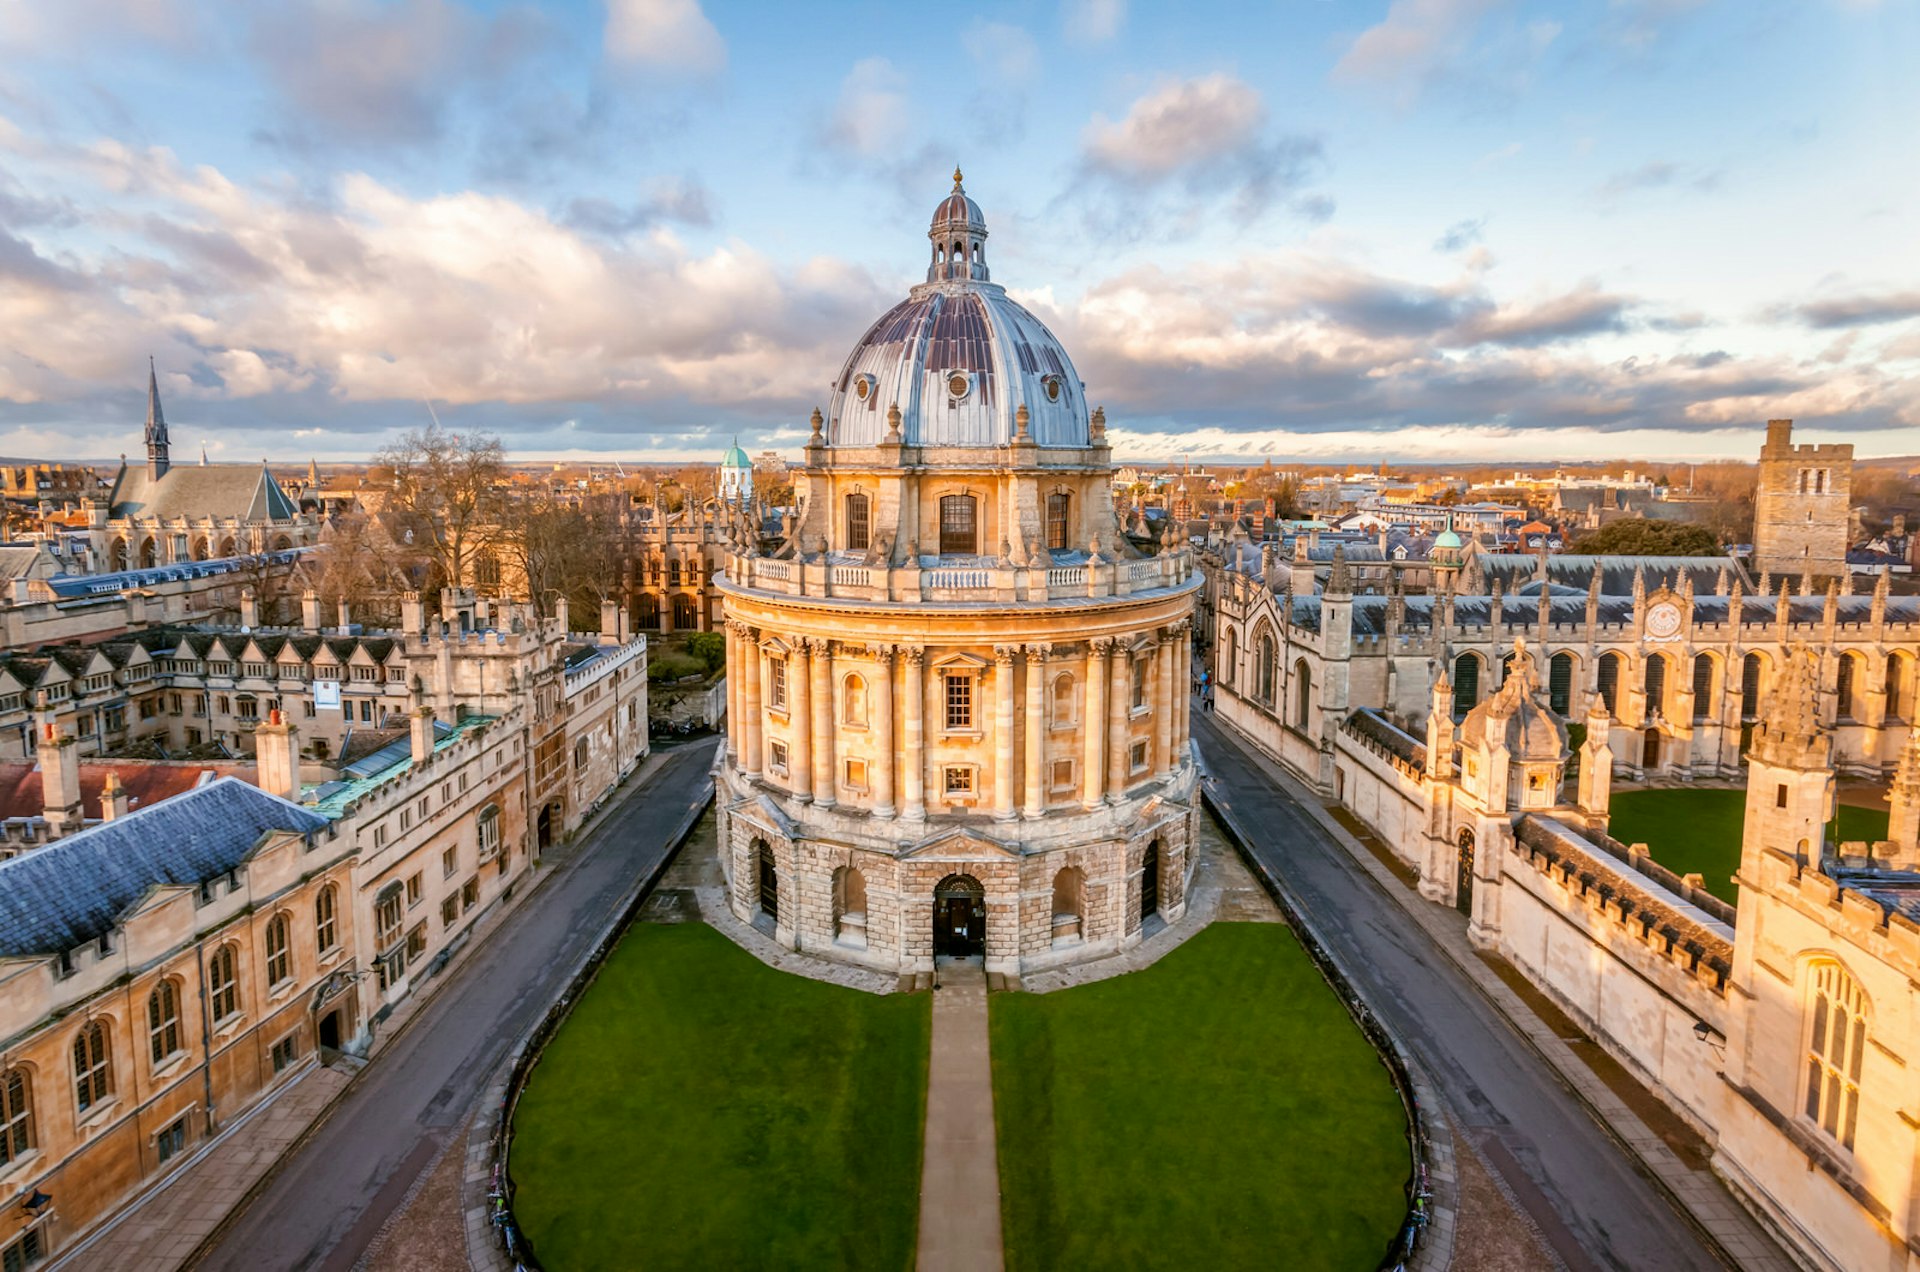 Killing Eve season two moves the action to Oxford; here we see the imposing circular sandstone Radcliffe Camera, in a square surrounded by equally beautiful college buildings.